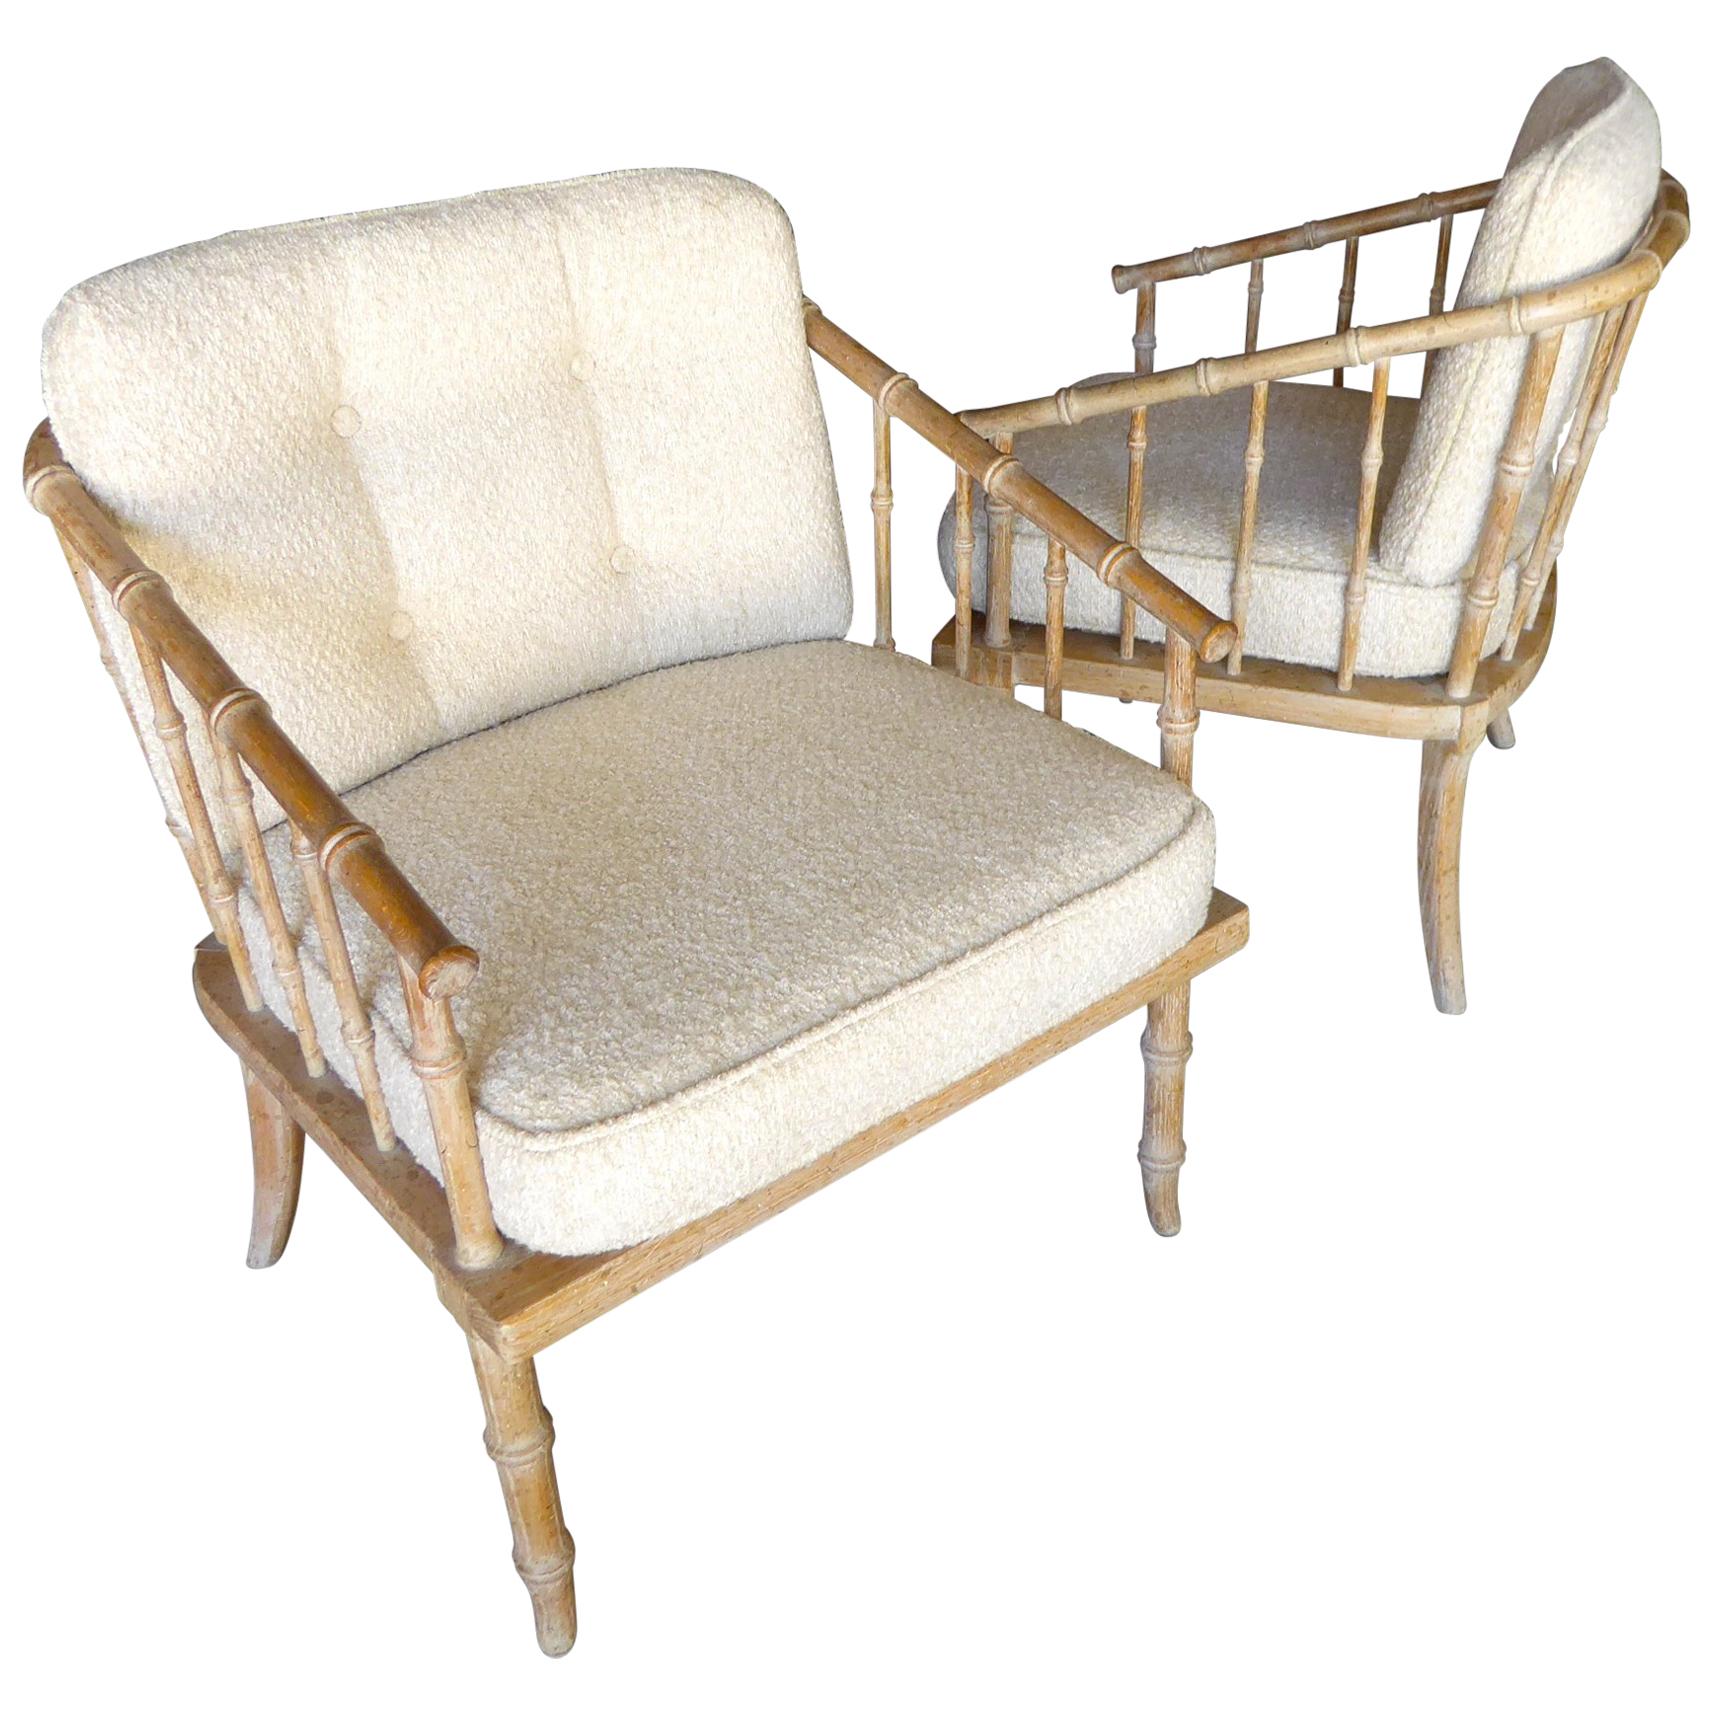 Pair of Faux-Bamboo Armchairs Attributed to McGuire